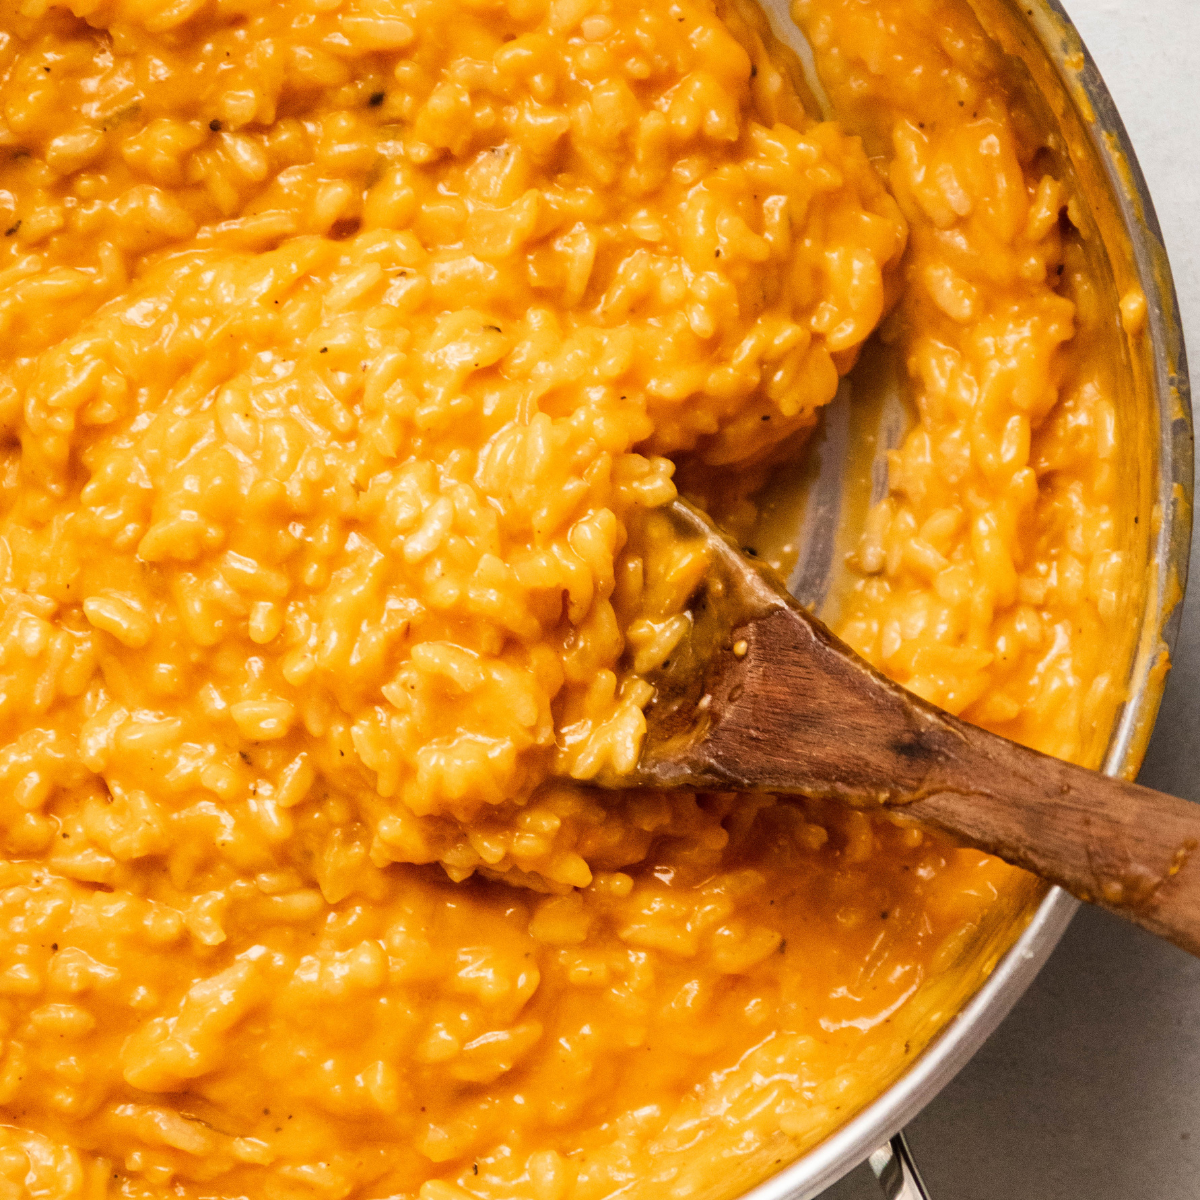 Wooden spoon stirring butternut squash puree into risotto.